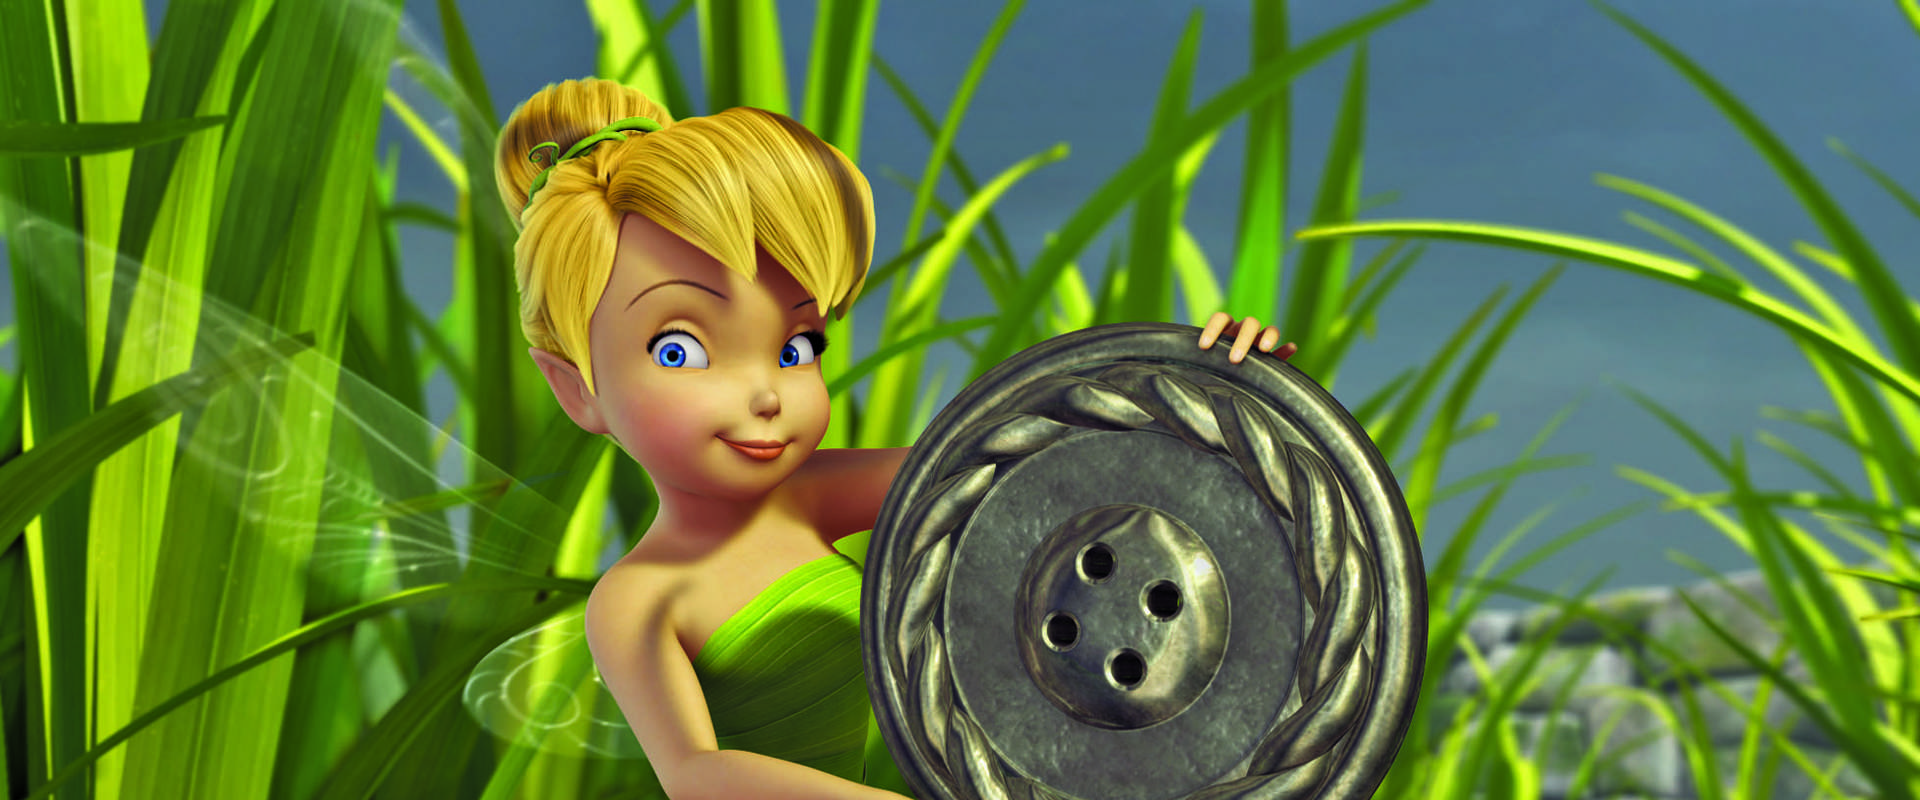 Tinker Bell and the Great Fairy Rescue background 1